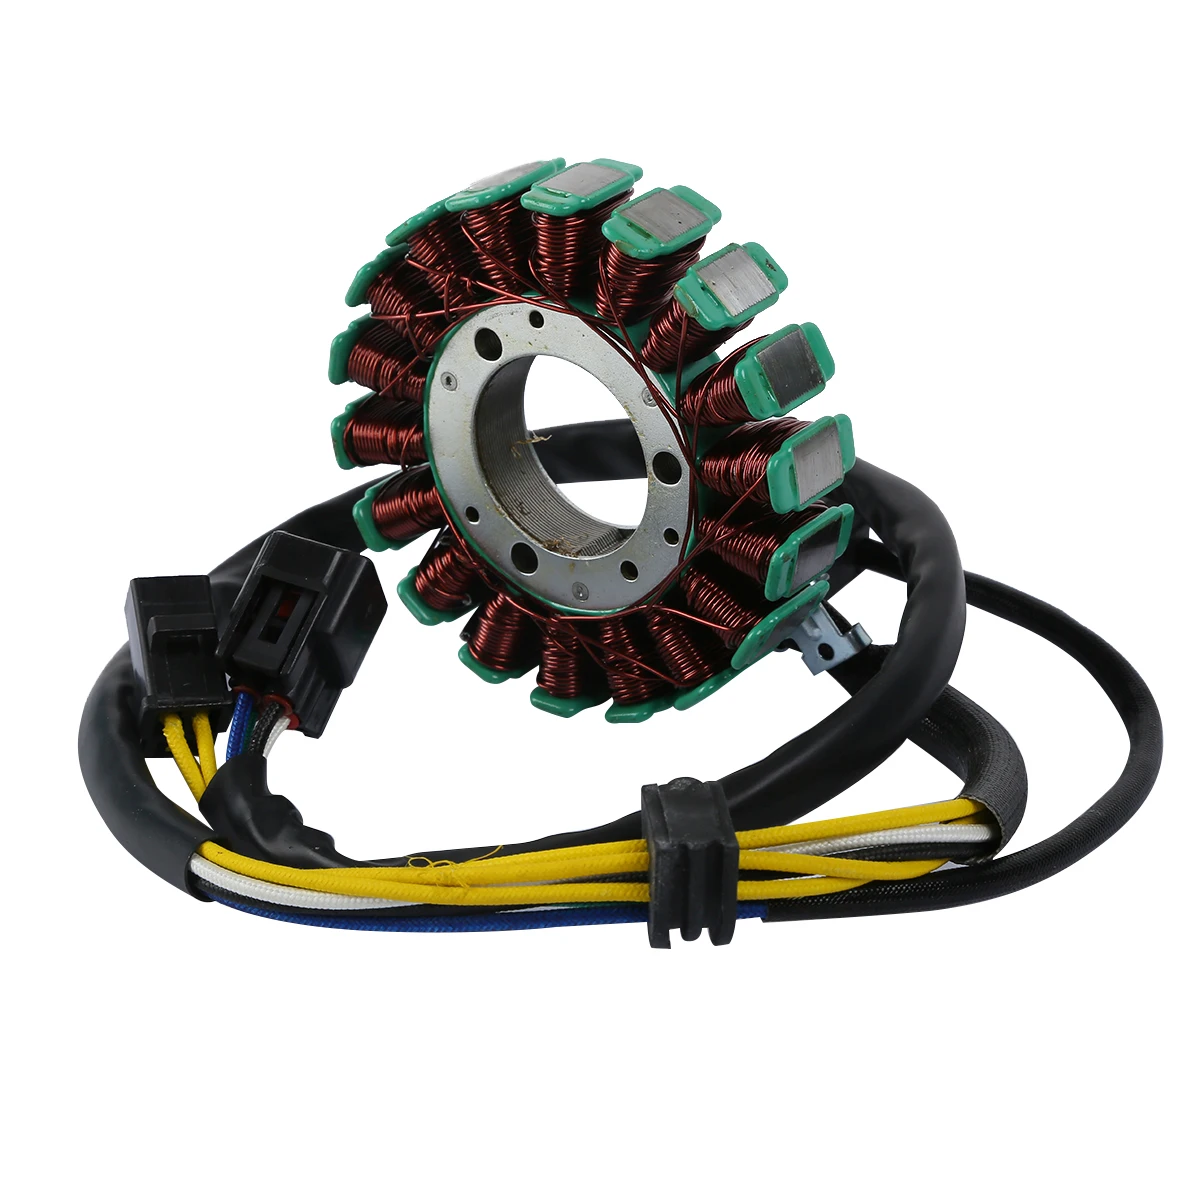 

Motorcycle Magneto Stator Coil For Suzuki DR250 DR 250 250XC 1994-2007 95 96 97 98 99 00 01 02 03 04 05 06